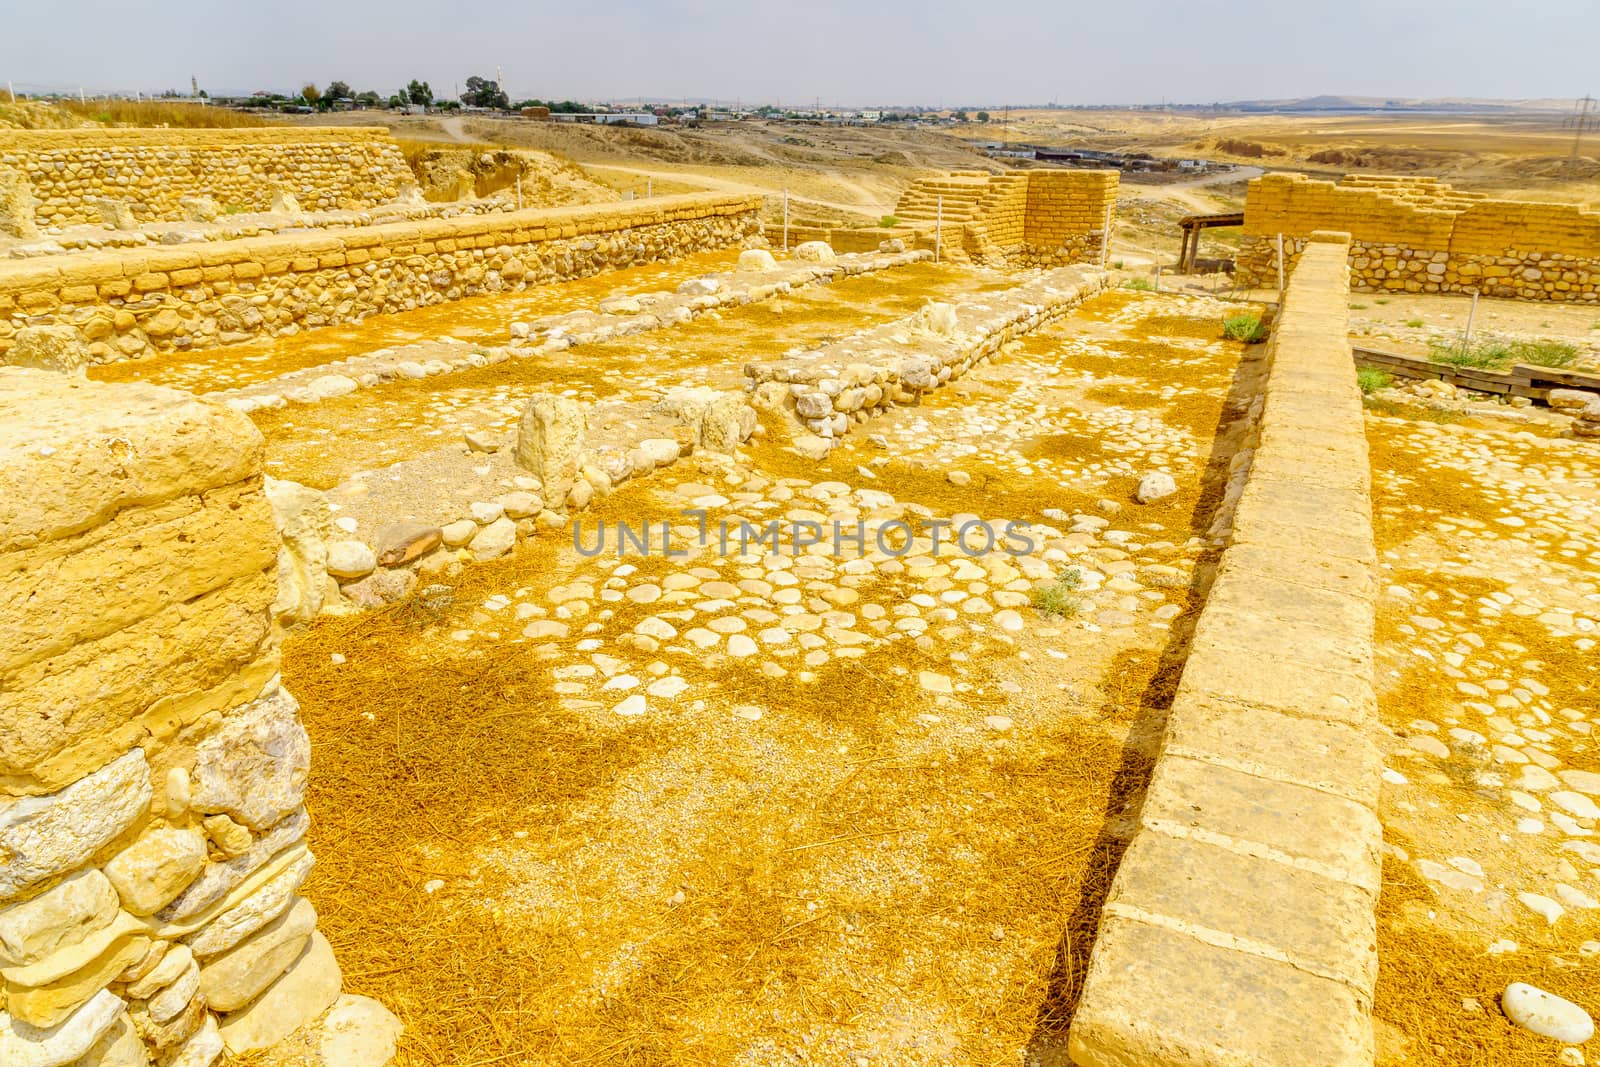 View of Tel Beer Sheva archaeological site, believed to be the remains of the biblical town of Beersheba. Now a UNESCO world heritage site and national park. Southern Israel